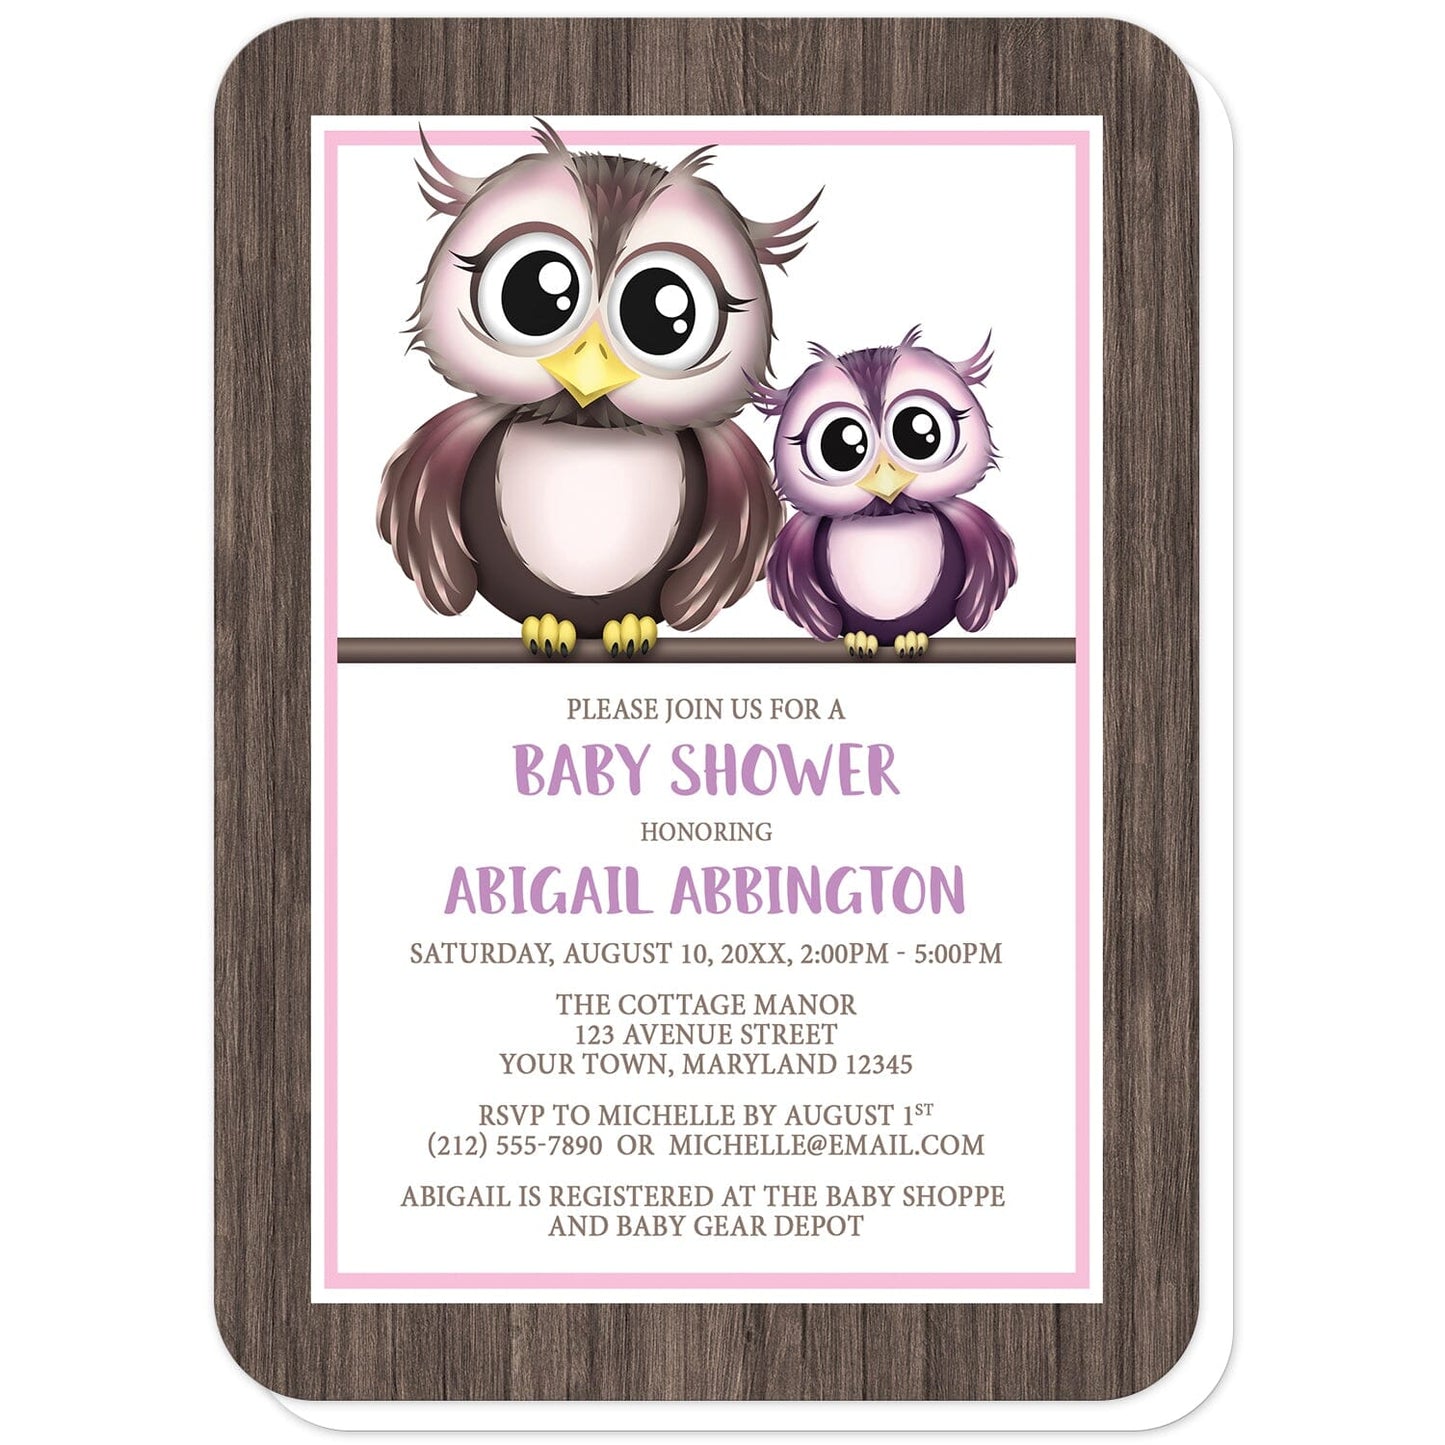 Adorable Owls Pink and Purple Baby Shower Invitations (with rounded corners) at Artistically Invited. Adorable invites with illustrations of an adorable pink and brown mommy owl with a purple baby owl with a rustic brown wood frame background design. These cute little owls stand at the top inside a white rectangle outlined in pink and white. The personalized information you provide for your owl baby shower invitations will be custom printed in purple and brown in the white rectangle below the owls.